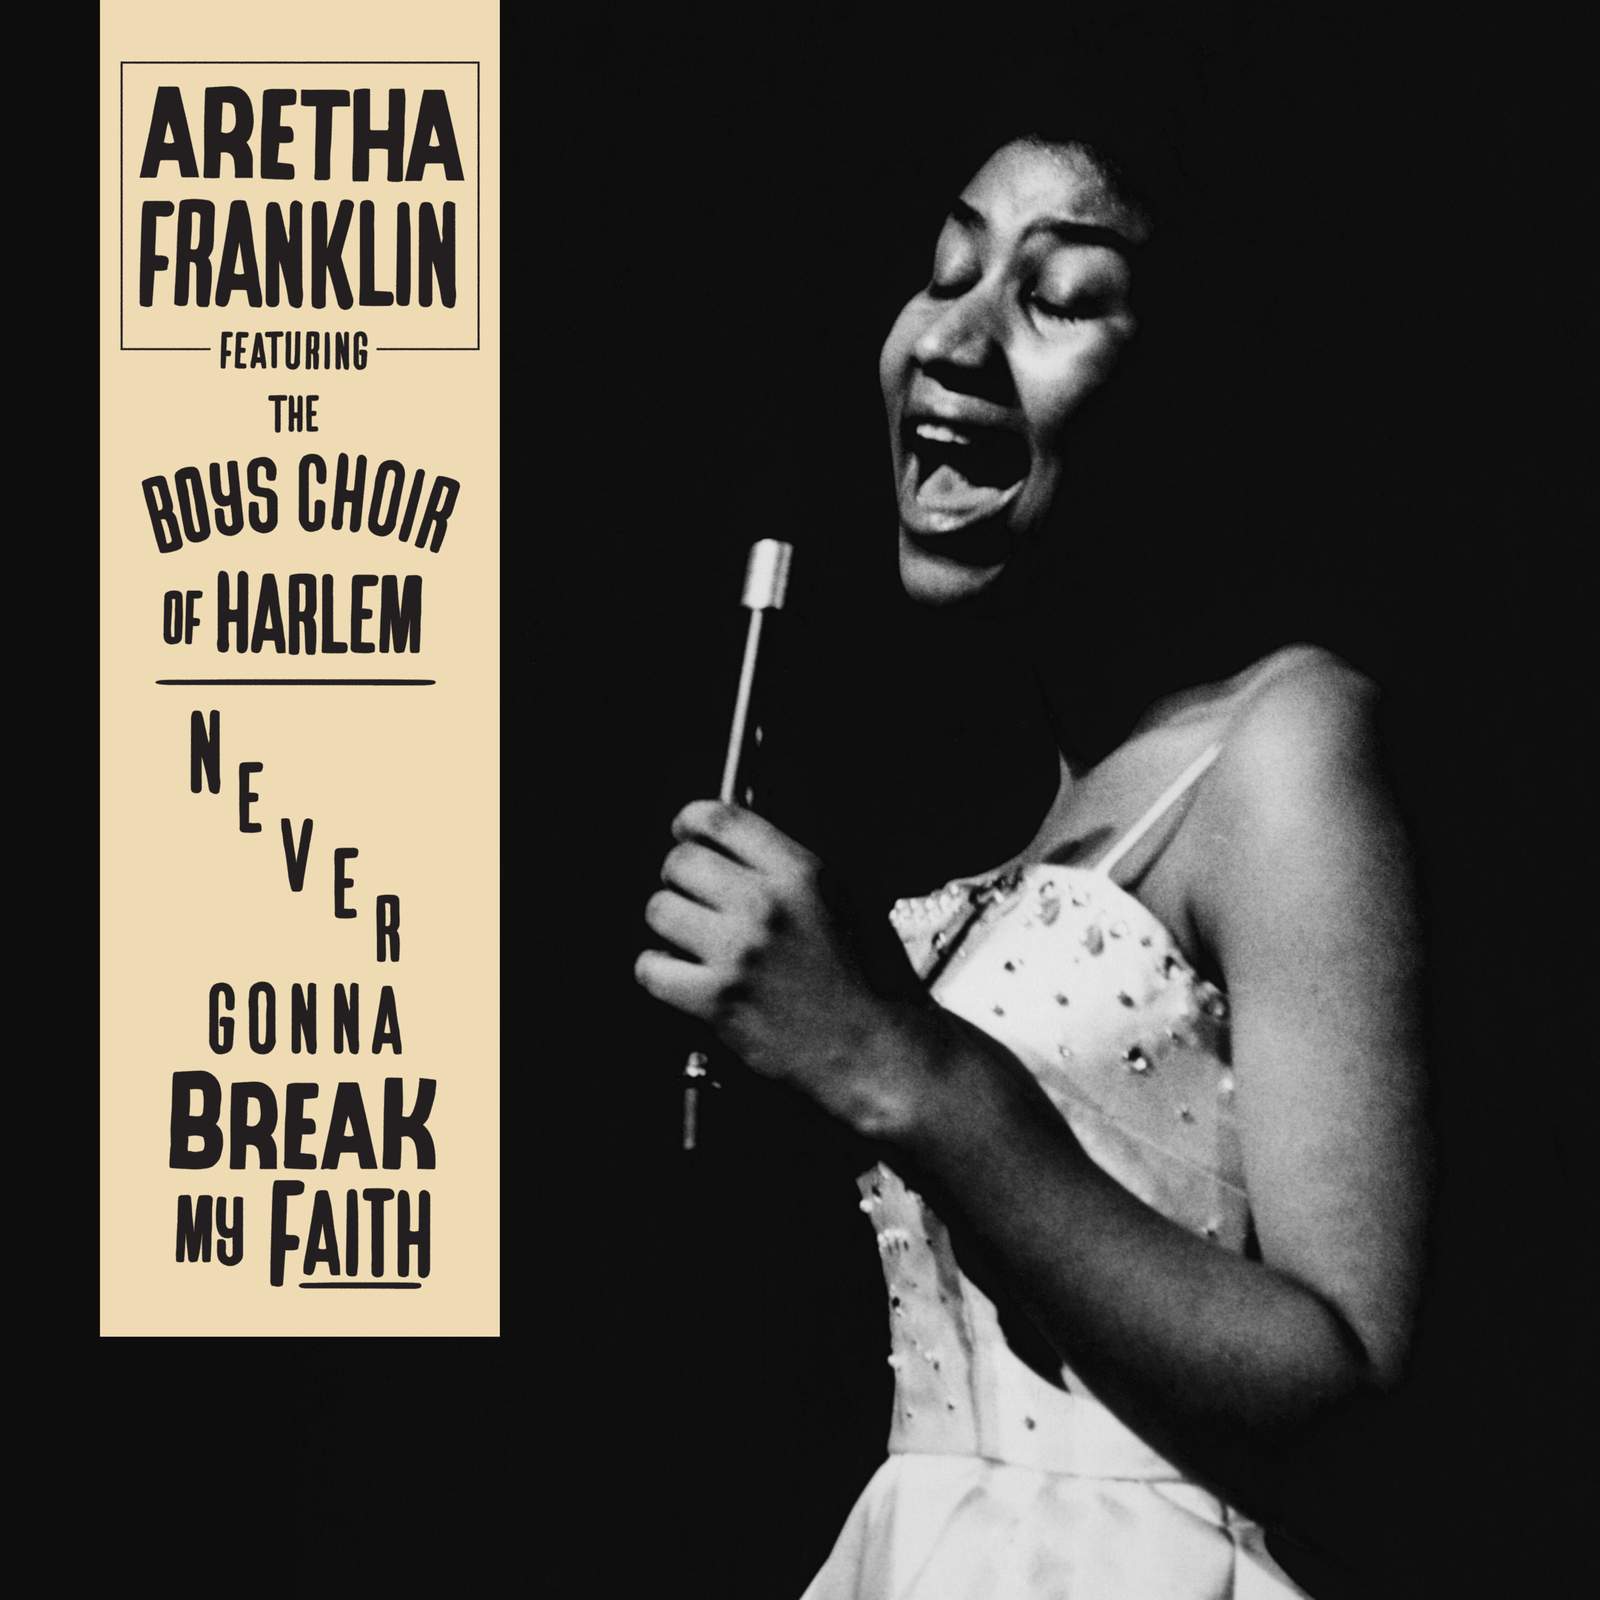 New solo version of Aretha song about race, faith released